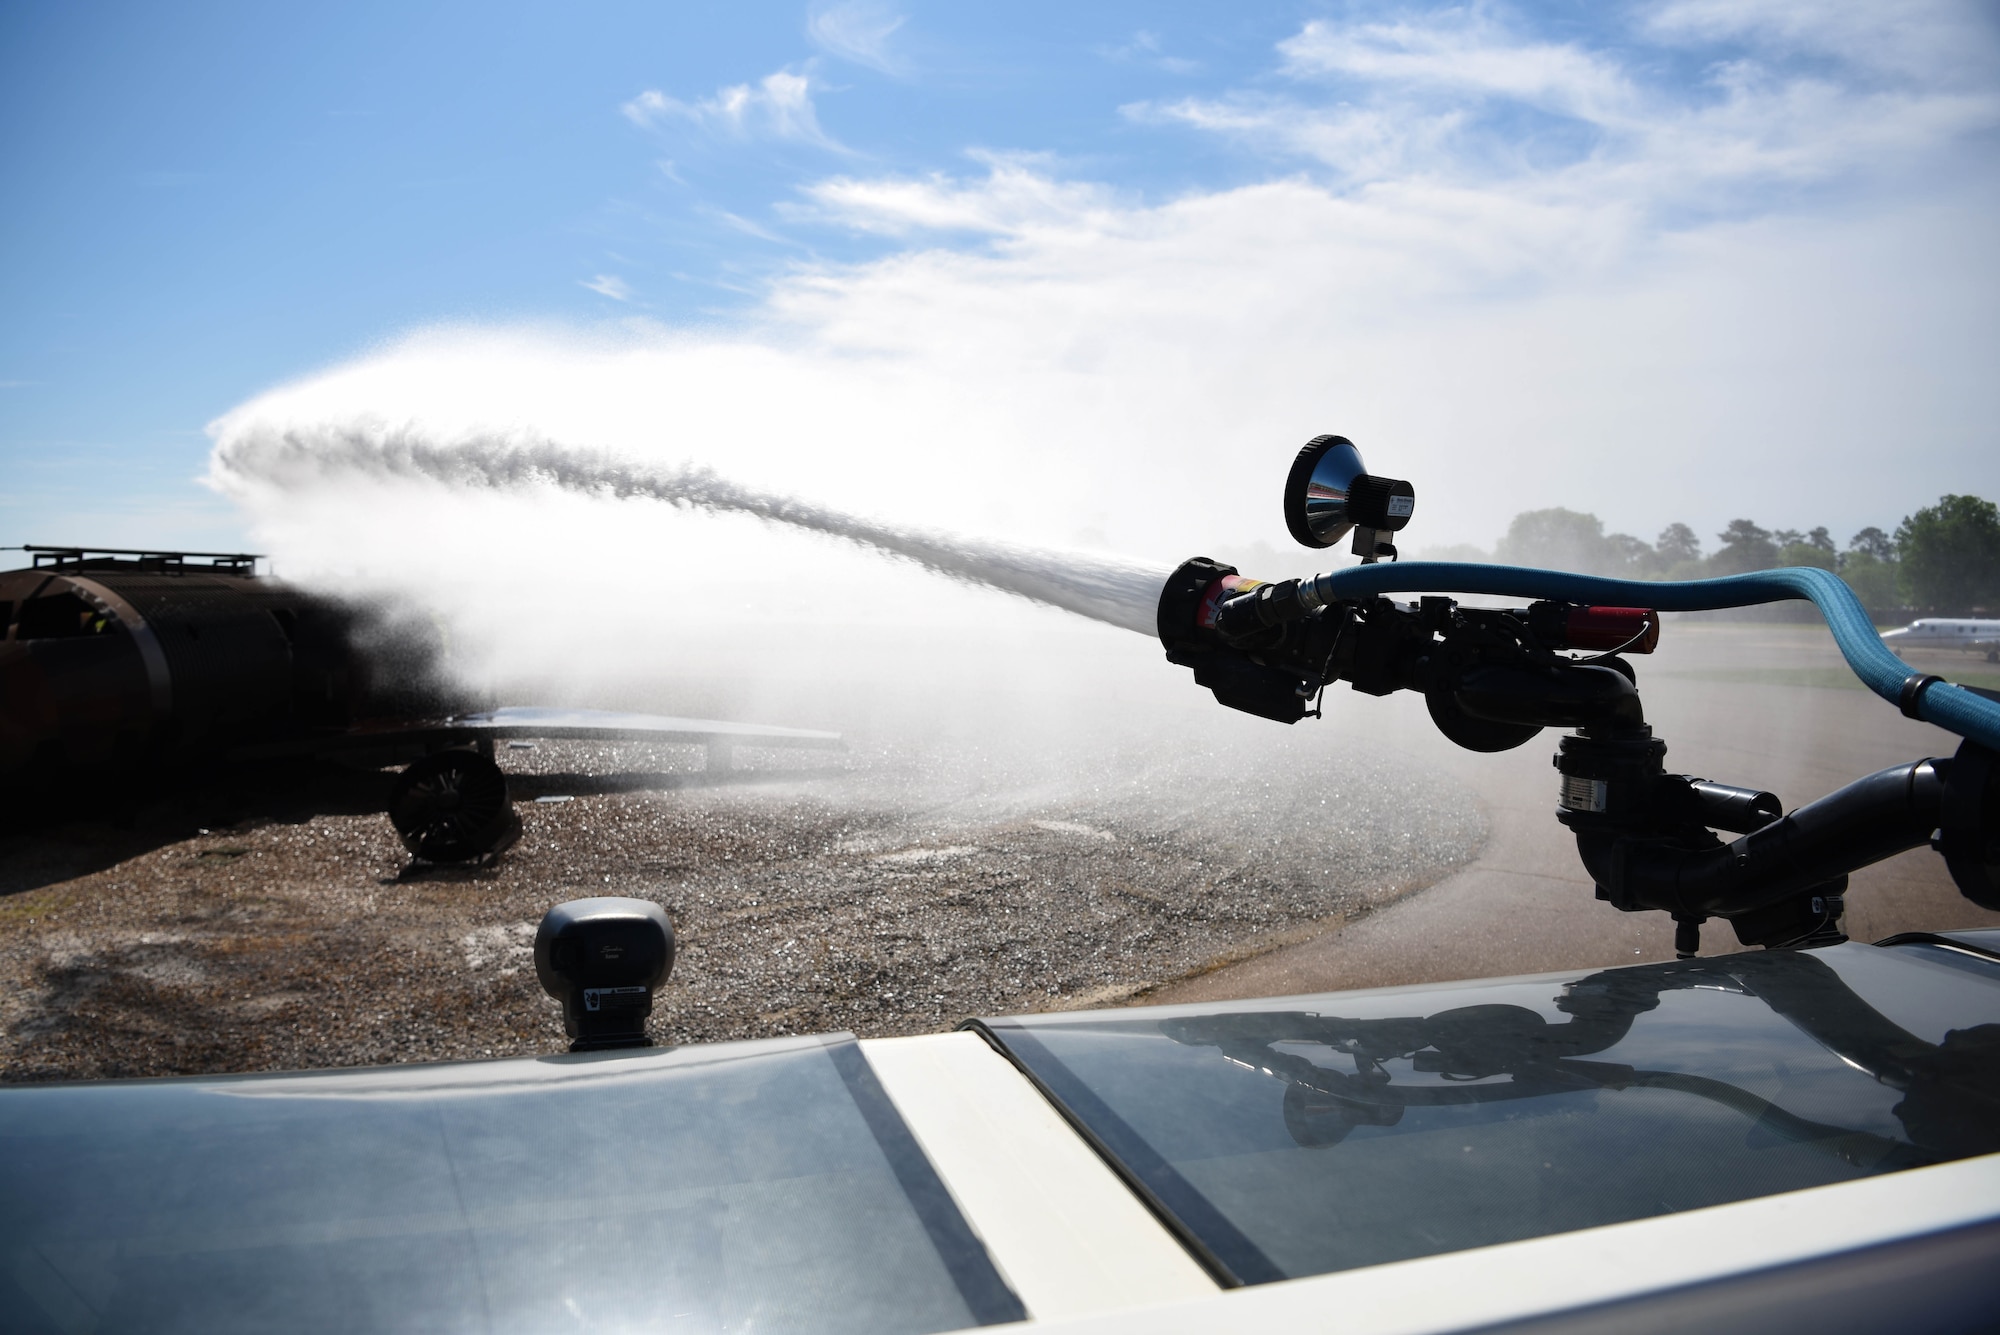 A Striker 1500 shoots out water toward an exercise aircraft model April 10, 2020, on Columbus Air Force Base, Miss. Columbus Air Force Base Fire and Emergency Services is tasked with mitigation and incident management for fire, aircraft, hazardous material, medical and other emergencies. (U.S. Air Force photo by Airman 1st Class Jake Jacobsen)